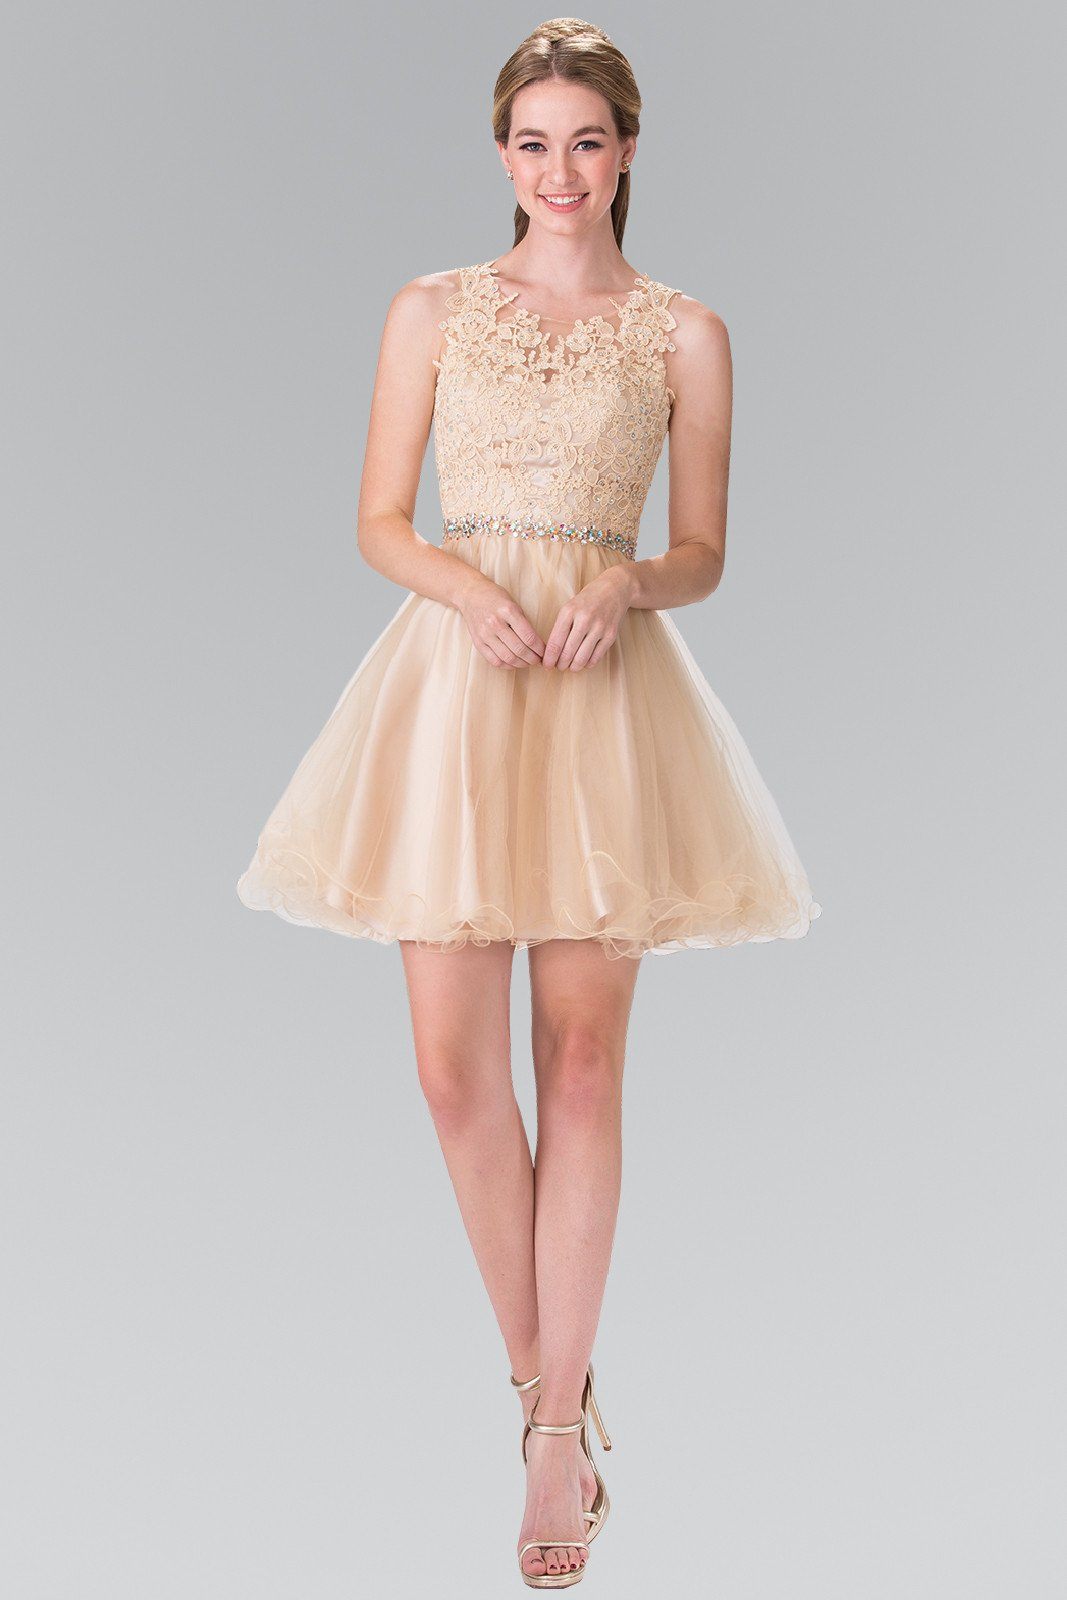 Short Sleeveless Dress with Lace Illusion Top by Elizabeth K GS2375-Short Cocktail Dresses-ABC Fashion